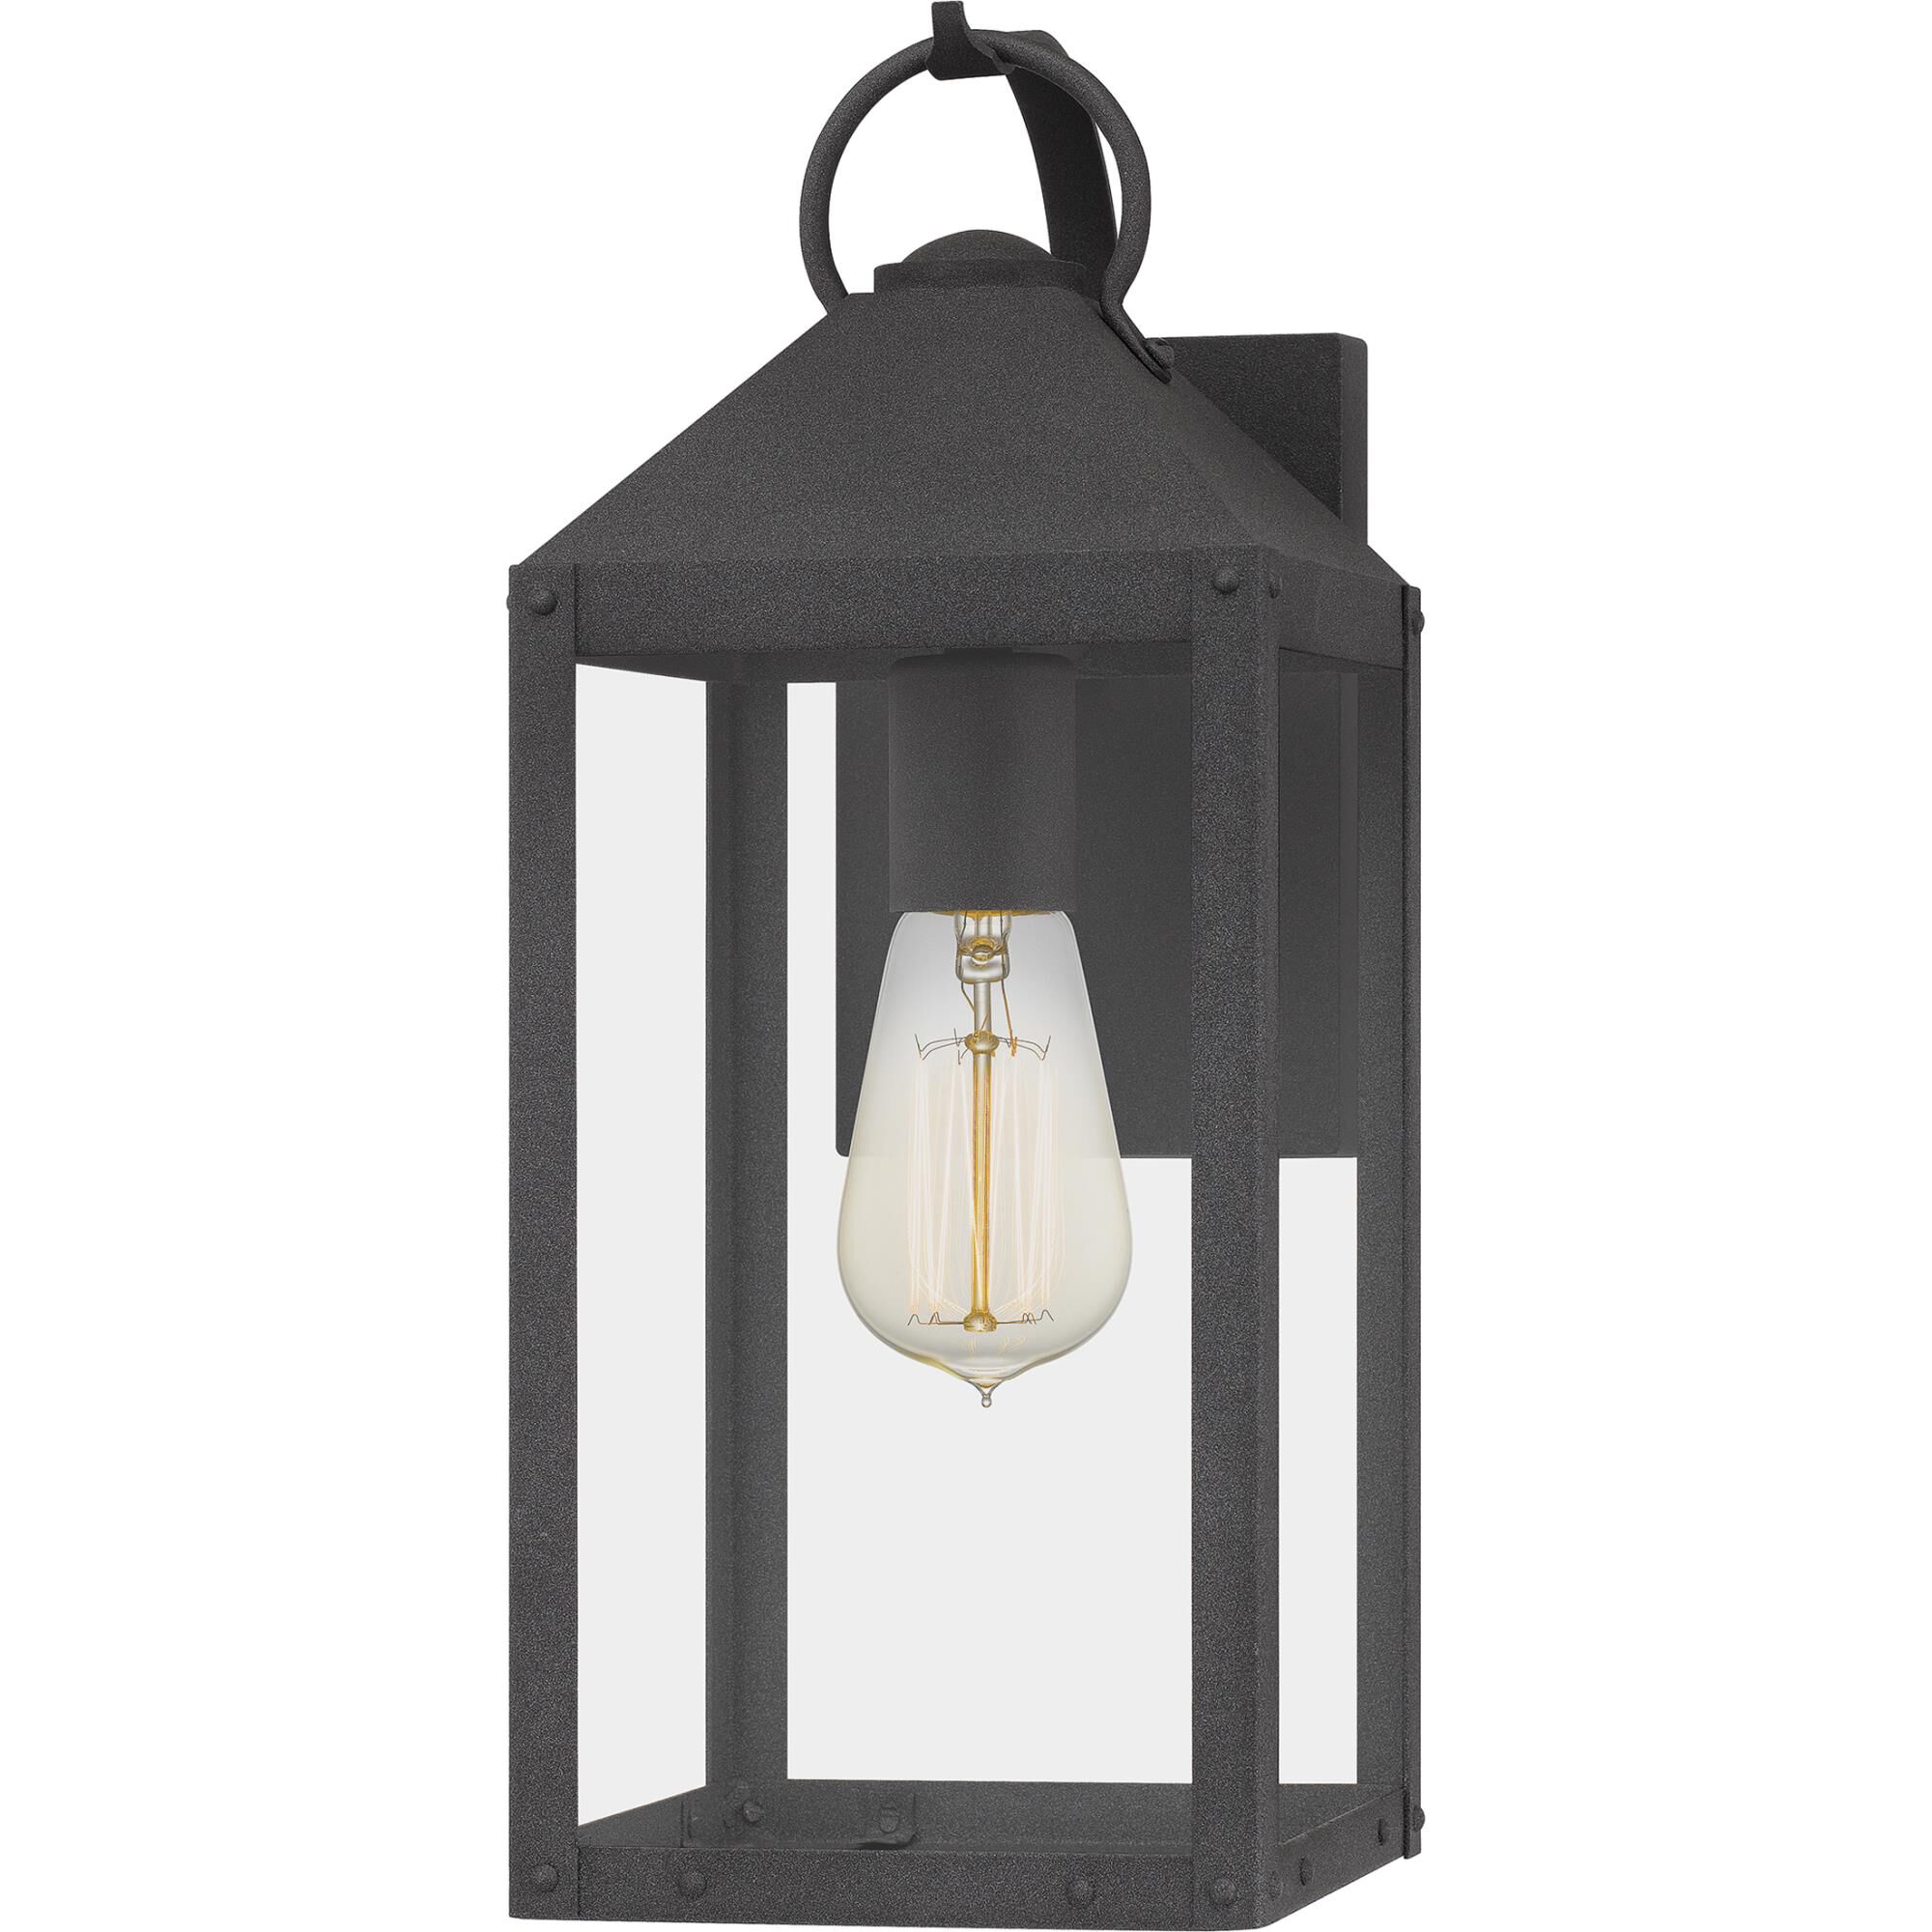 Photos - Chandelier / Lamp Quoizel Thorpe 15 Inch Tall Outdoor Wall Light Thorpe - TPE8406MB - Transi 